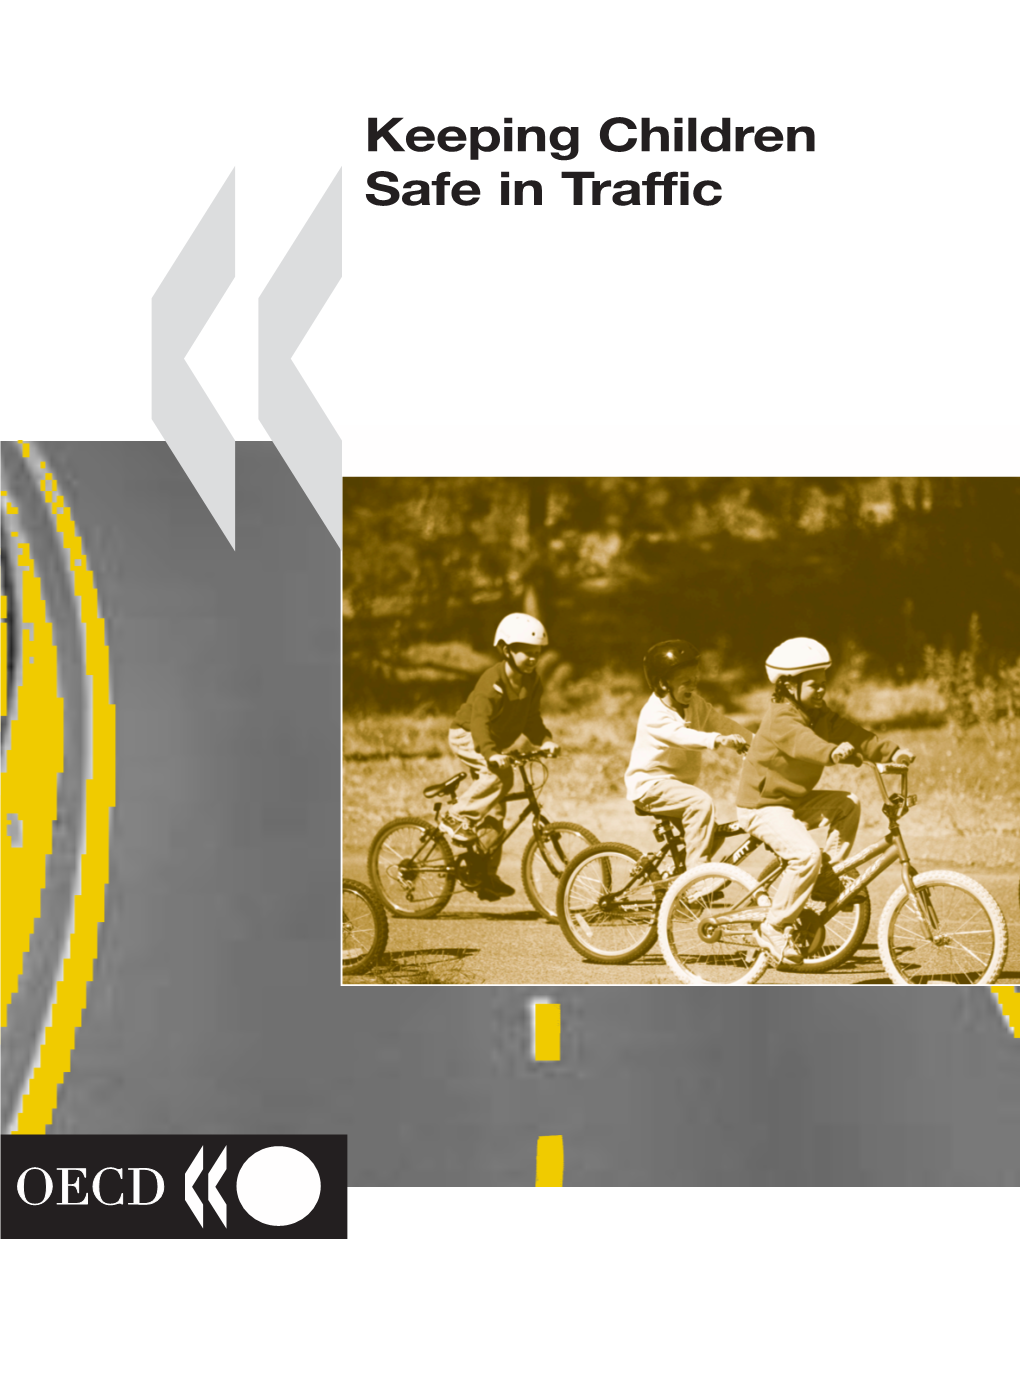 Keeping Children Safe in Traffic «Keeping Children in Many OECD Countries, Road-Related Crashes Are the Number One Killer of Children Under the Age of 15